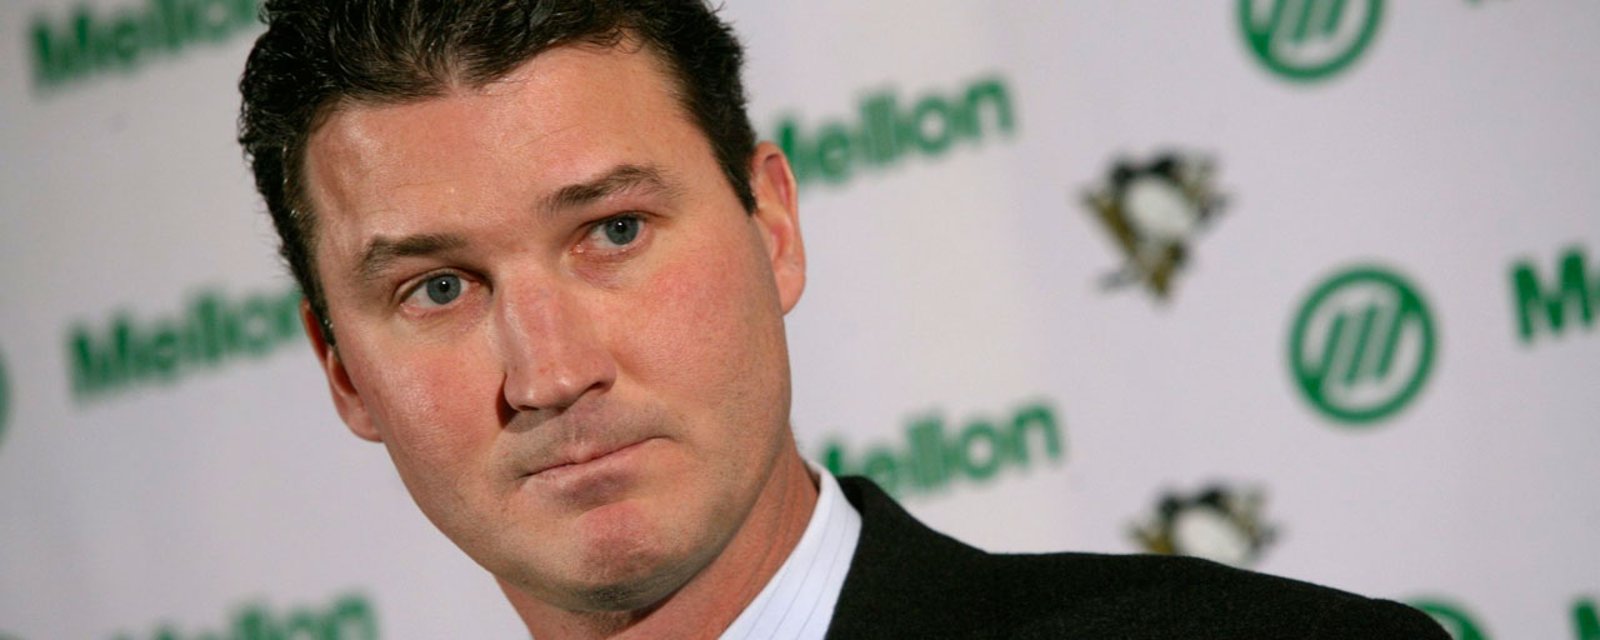 Mario Lemieux caught up in more than one sexual assault scandals